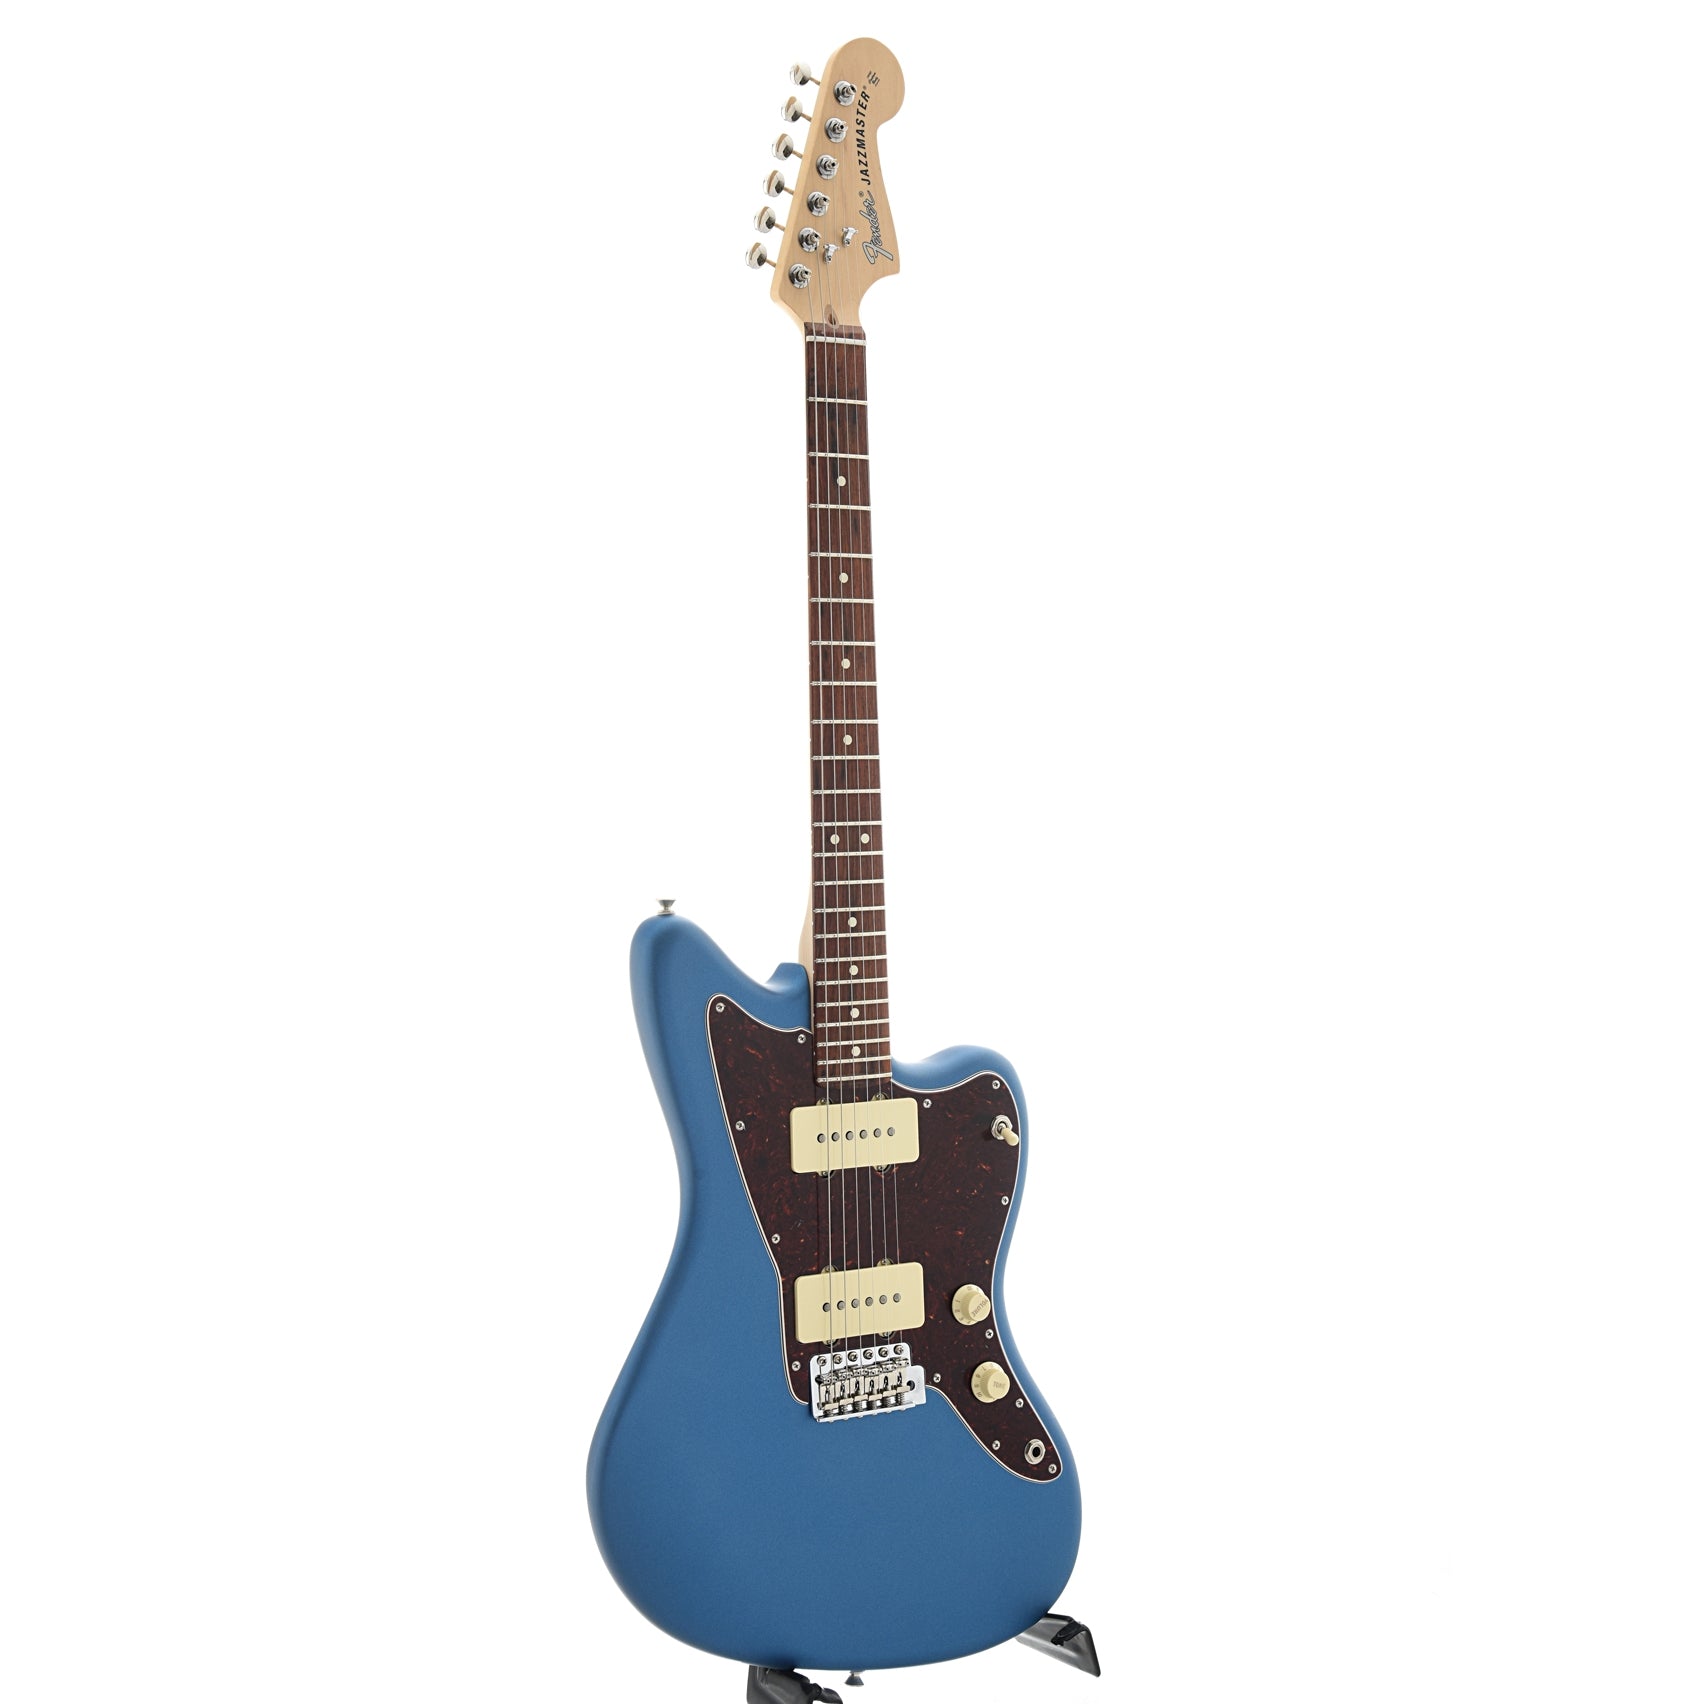 Full front and side of Fender American Performer Jazzmaster, Lake Placid Blue